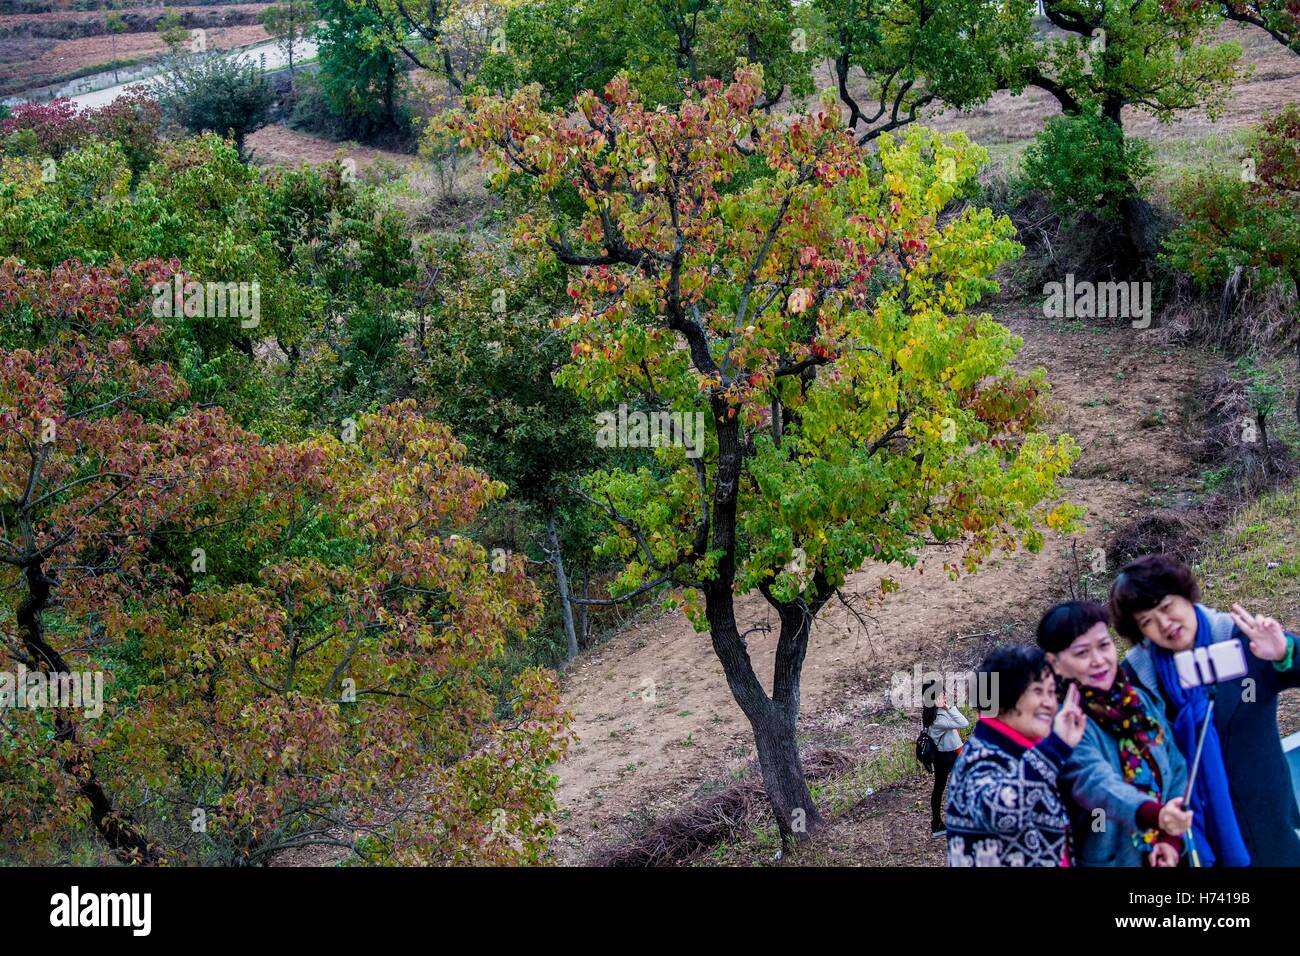 Dawu, China's Hubei Province. 2nd Nov, 2016. Tourists take photos in front of Chinese tallow trees in Beishan Village of Dawu County, central China's Hubei Province, Nov. 2, 2016. Chinese tallow tree, known as Sapium sebiferum scientifically, is a good material for furniture, and its resin and seeds can produce oil for industrial use. © Du Huaju/Xinhua/Alamy Live News Stock Photo